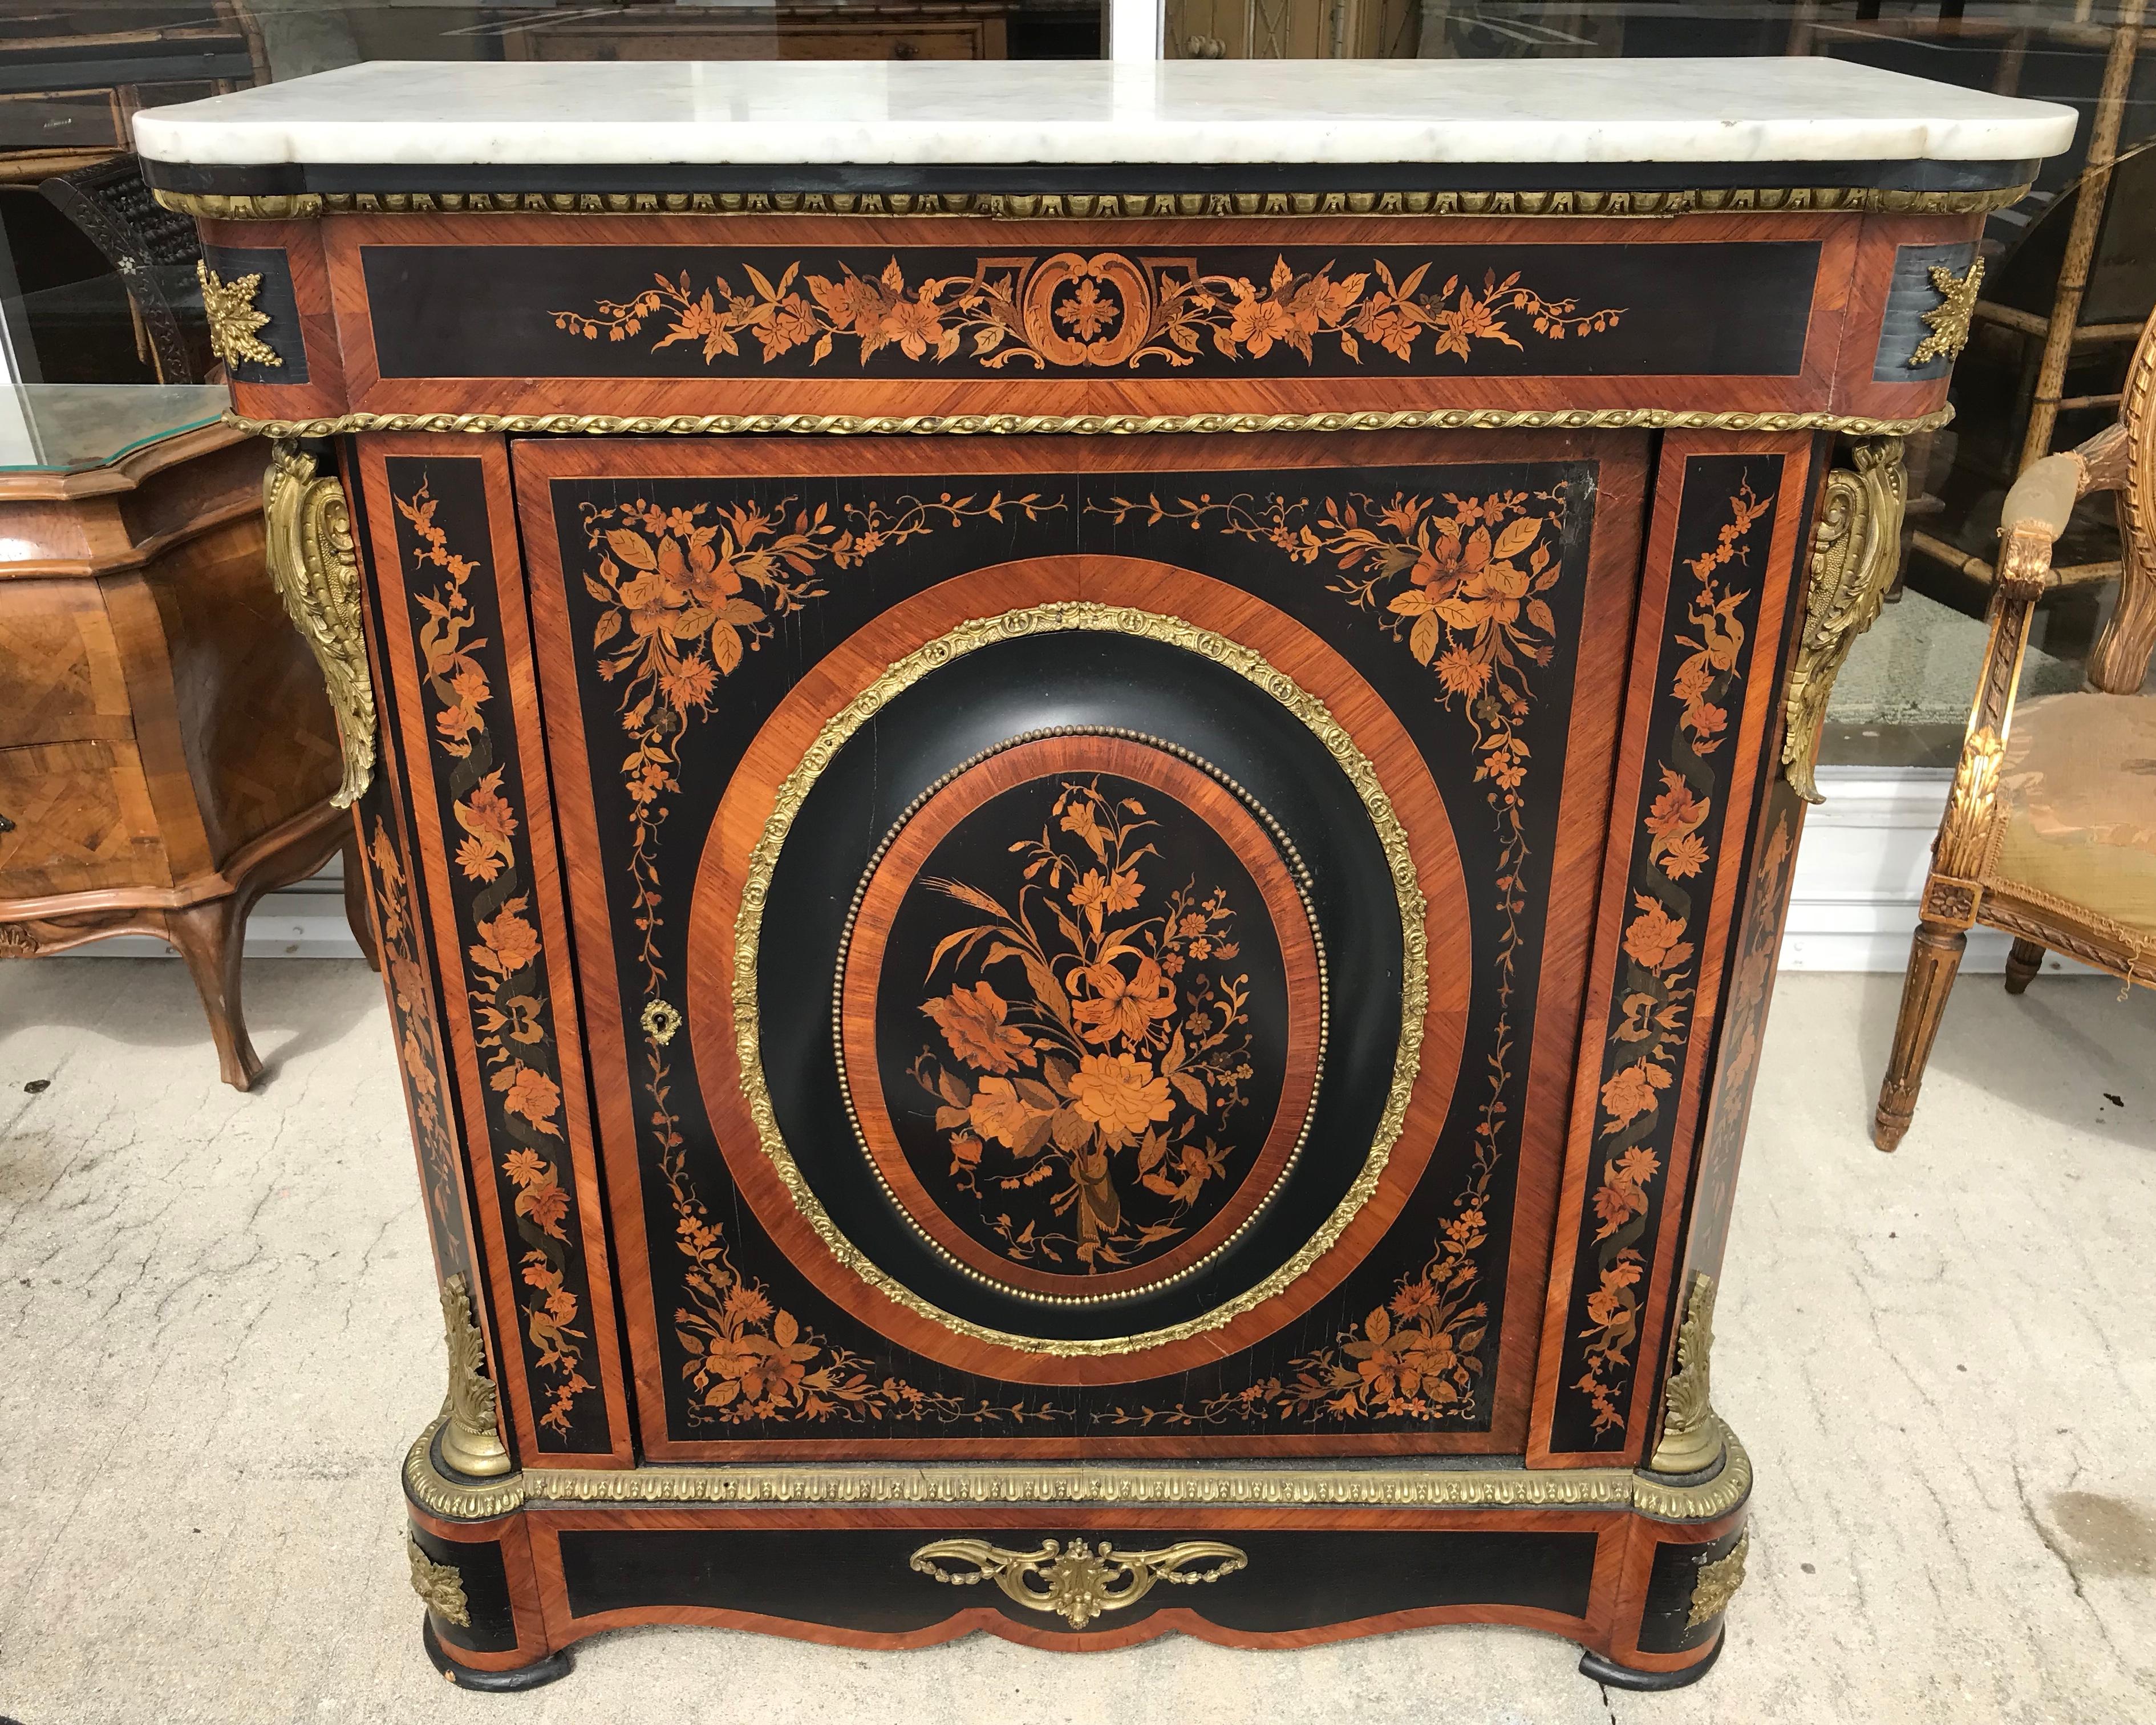 Fashioned with elaborate inlays and appointed with rich bronze adornments.
The cabinet is dramatic in scale and ornamentation.
The marble top is original, and the large central medallion is slightly convex - unusual.